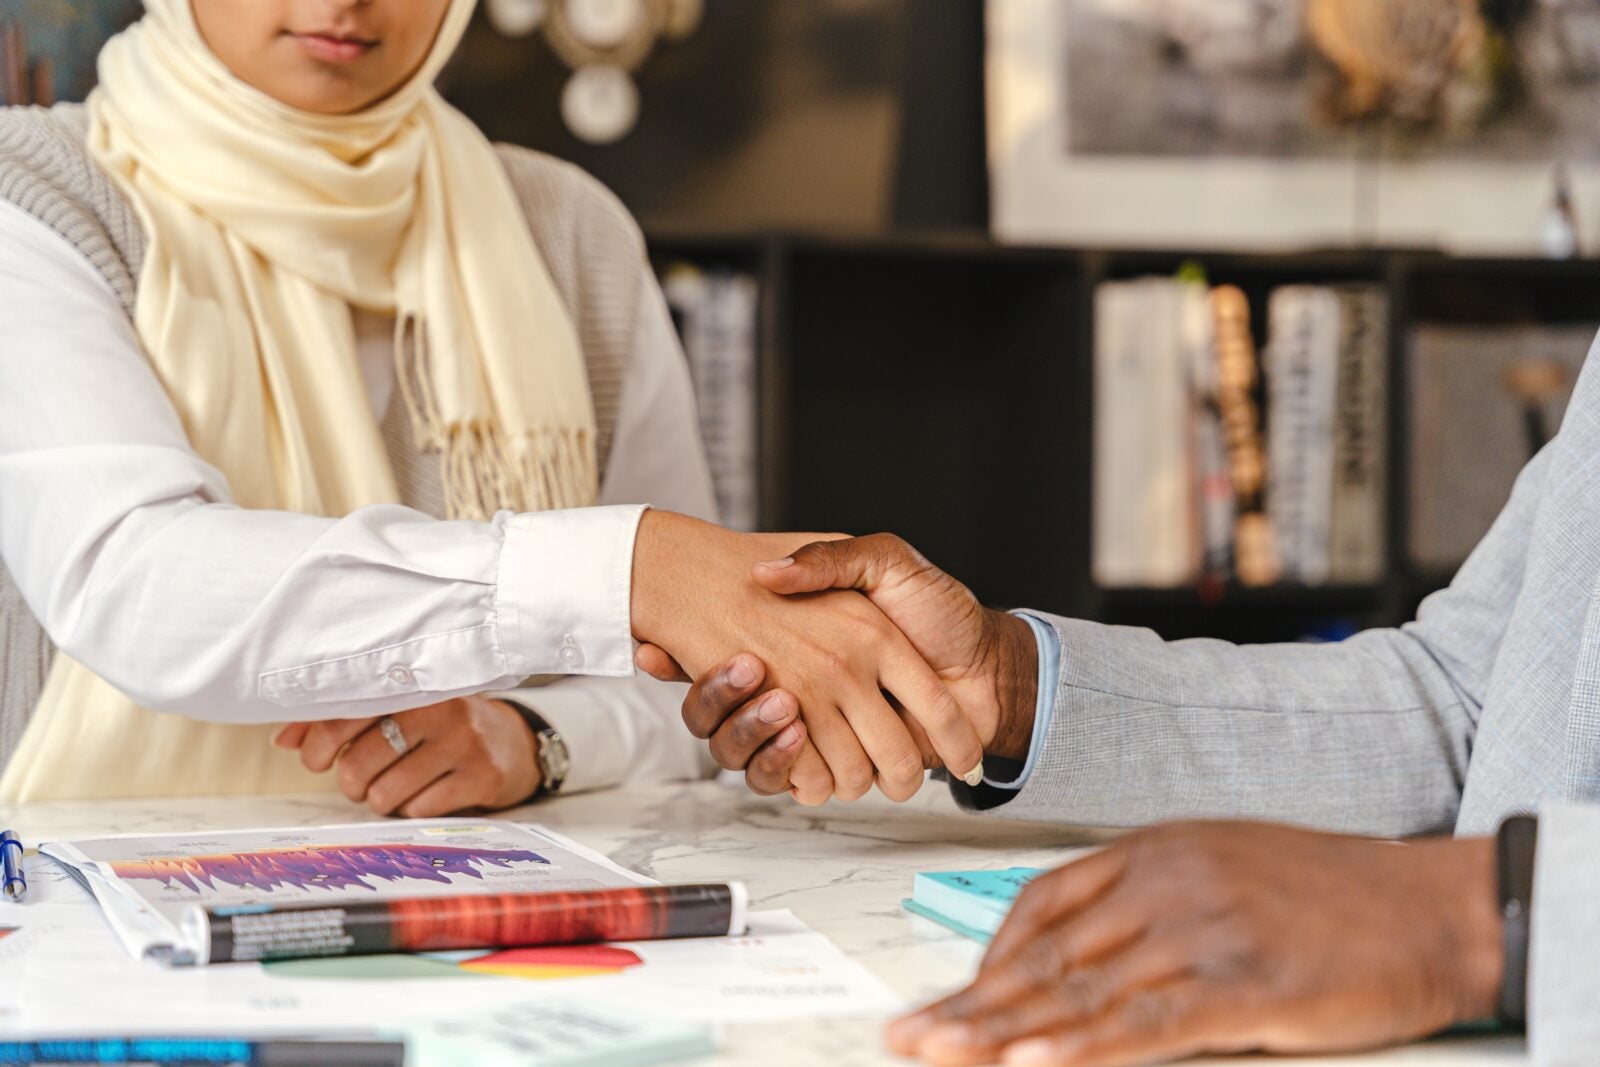 A cropped image of a woman wearing beige hijab shaking hands with a man.